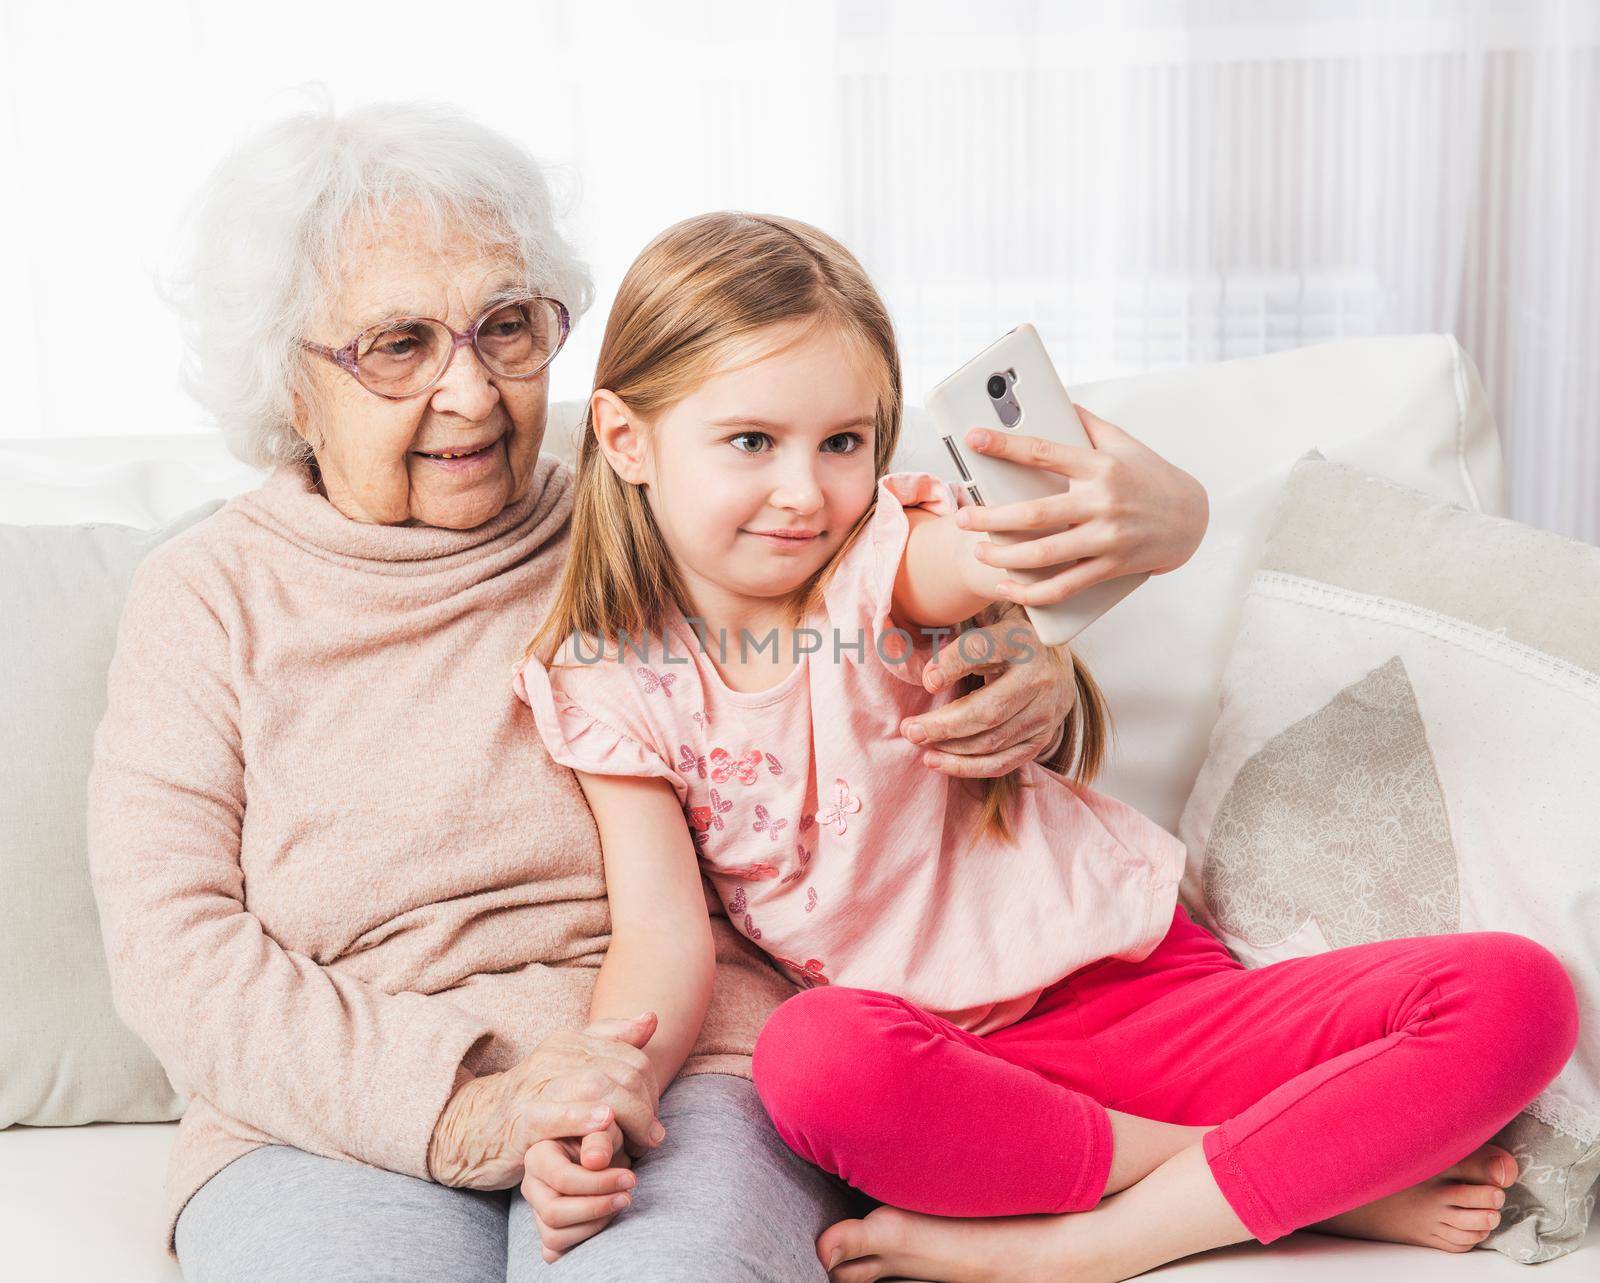 Little granddaughter taking selfie with great-grandmother